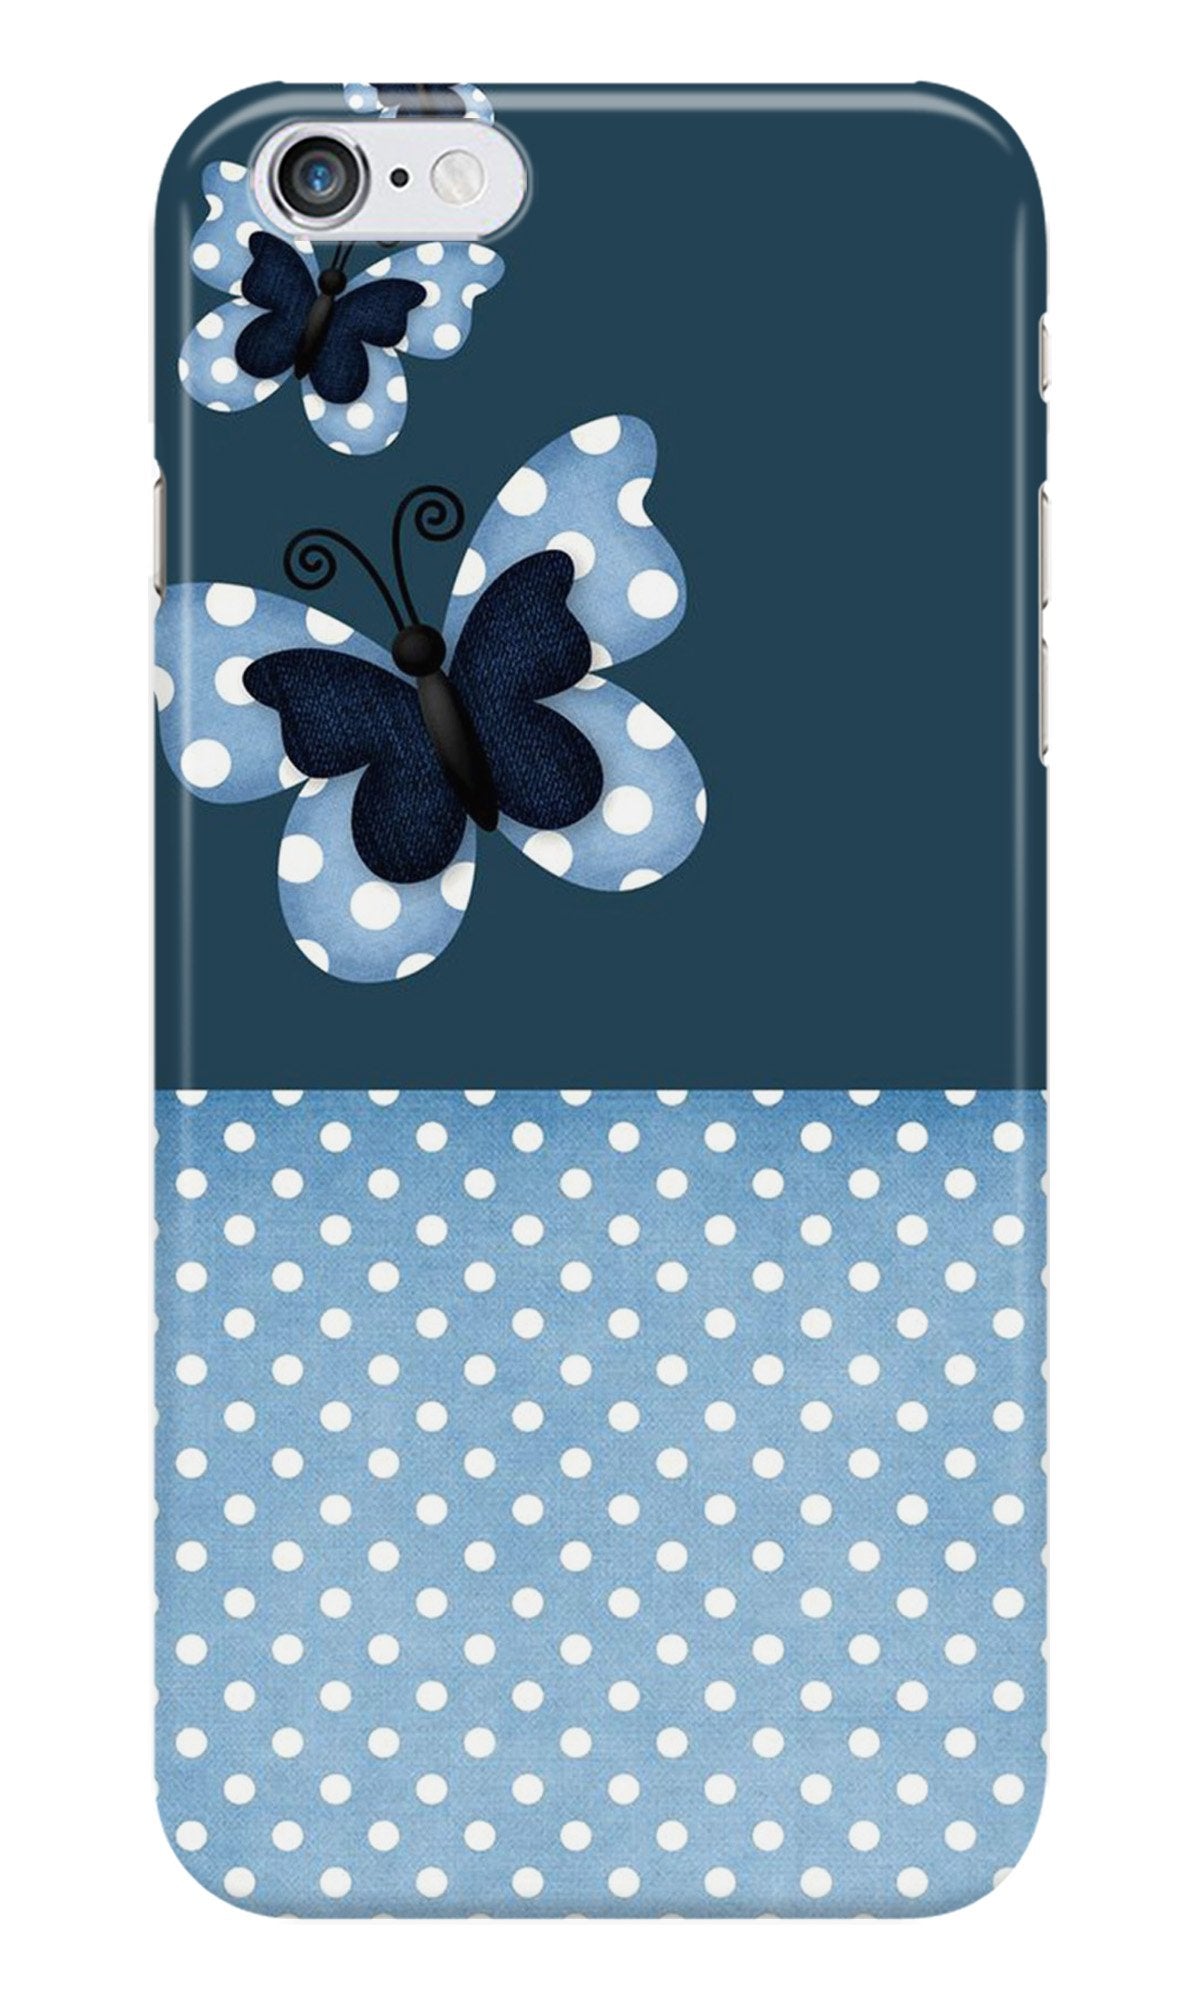 White dots Butterfly Case for iPhone 6 Plus/ 6s Plus